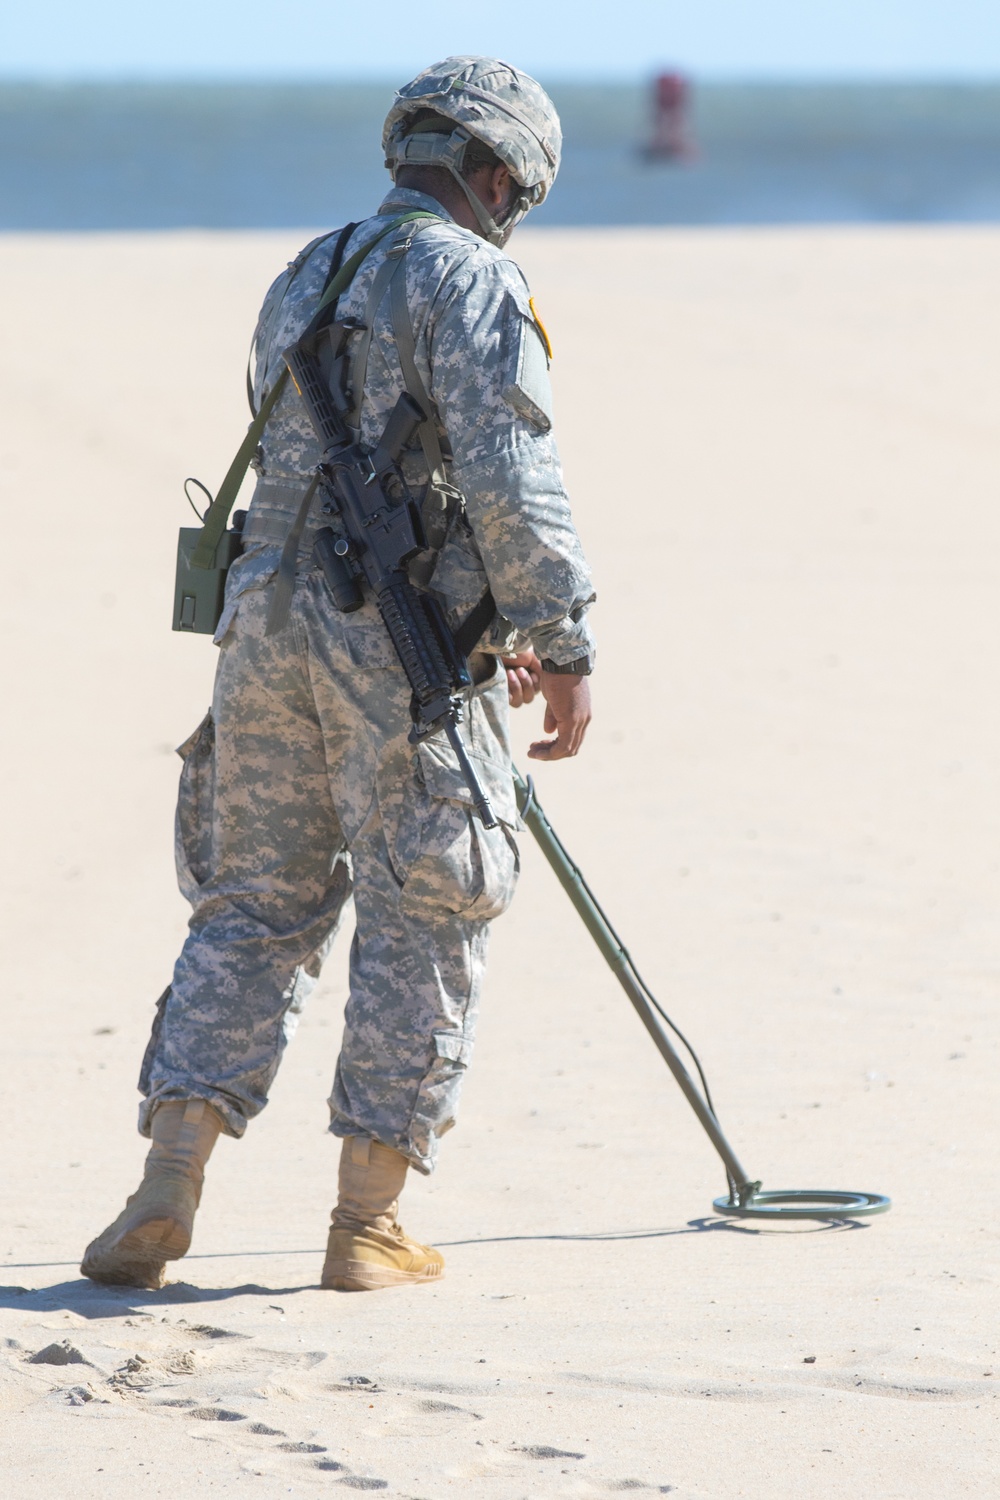 Engineers take charge in finding mines in exercise